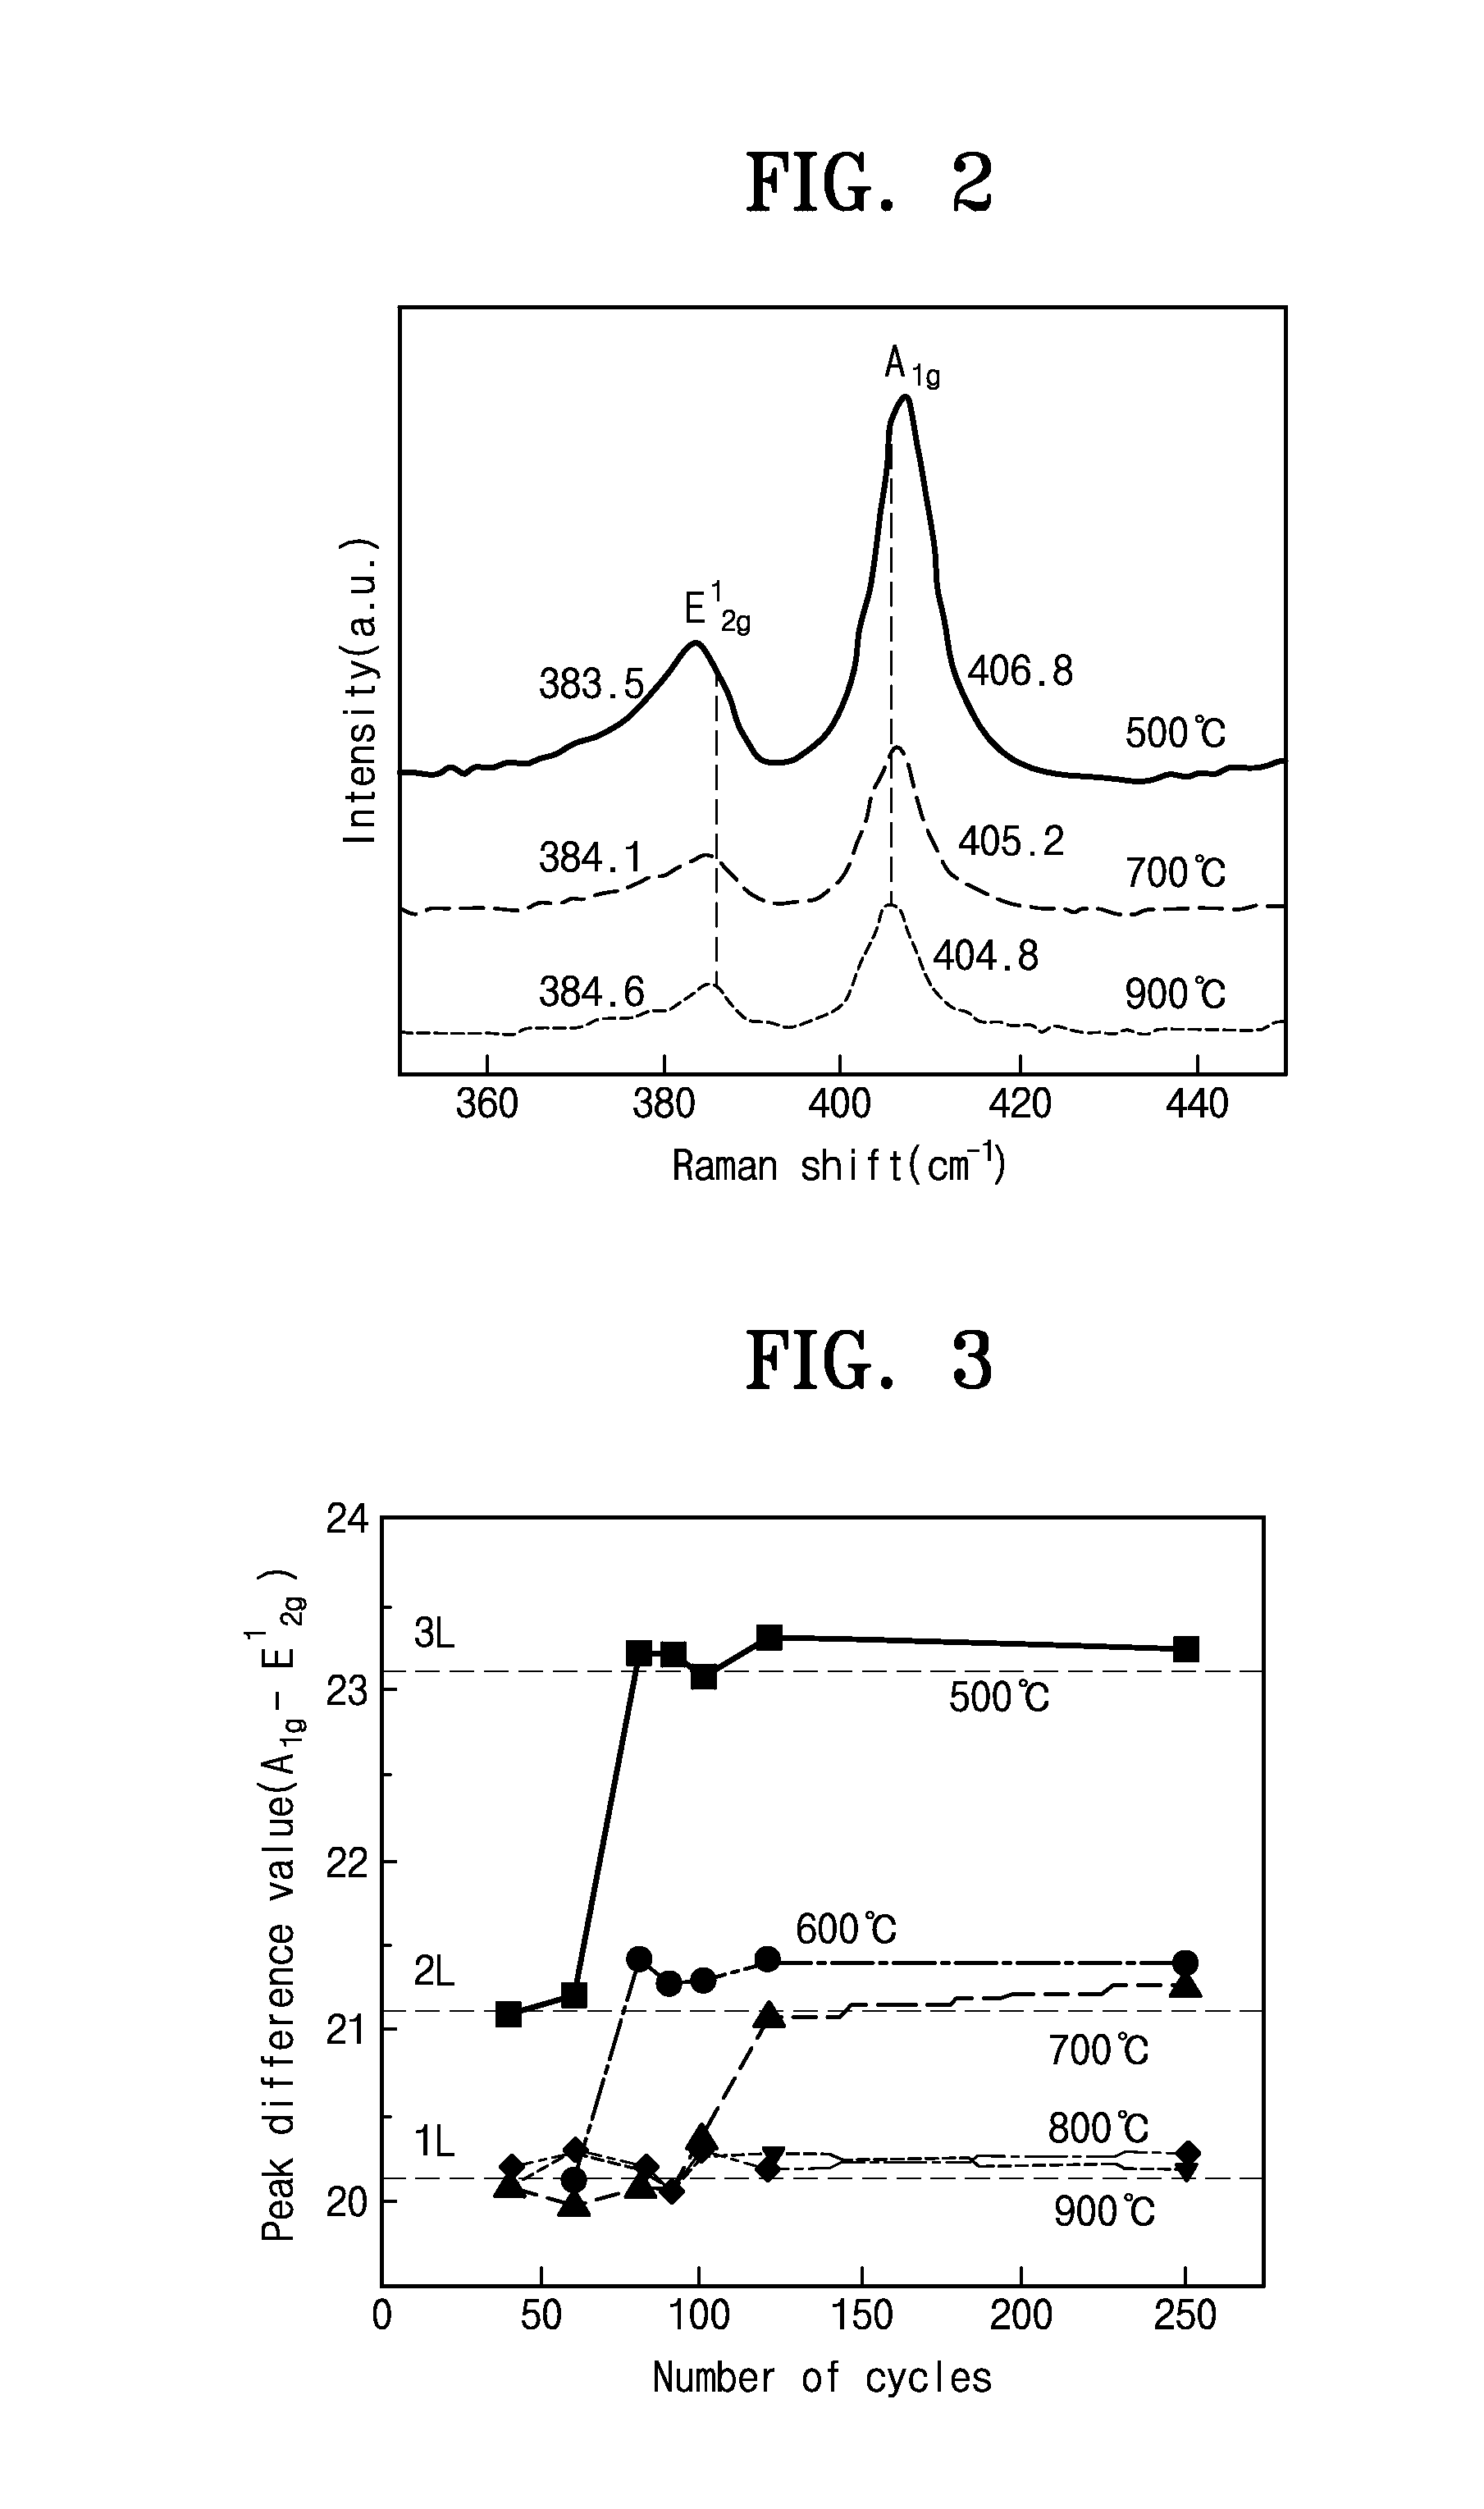 Method for synthesis of transition metal chalcogenide